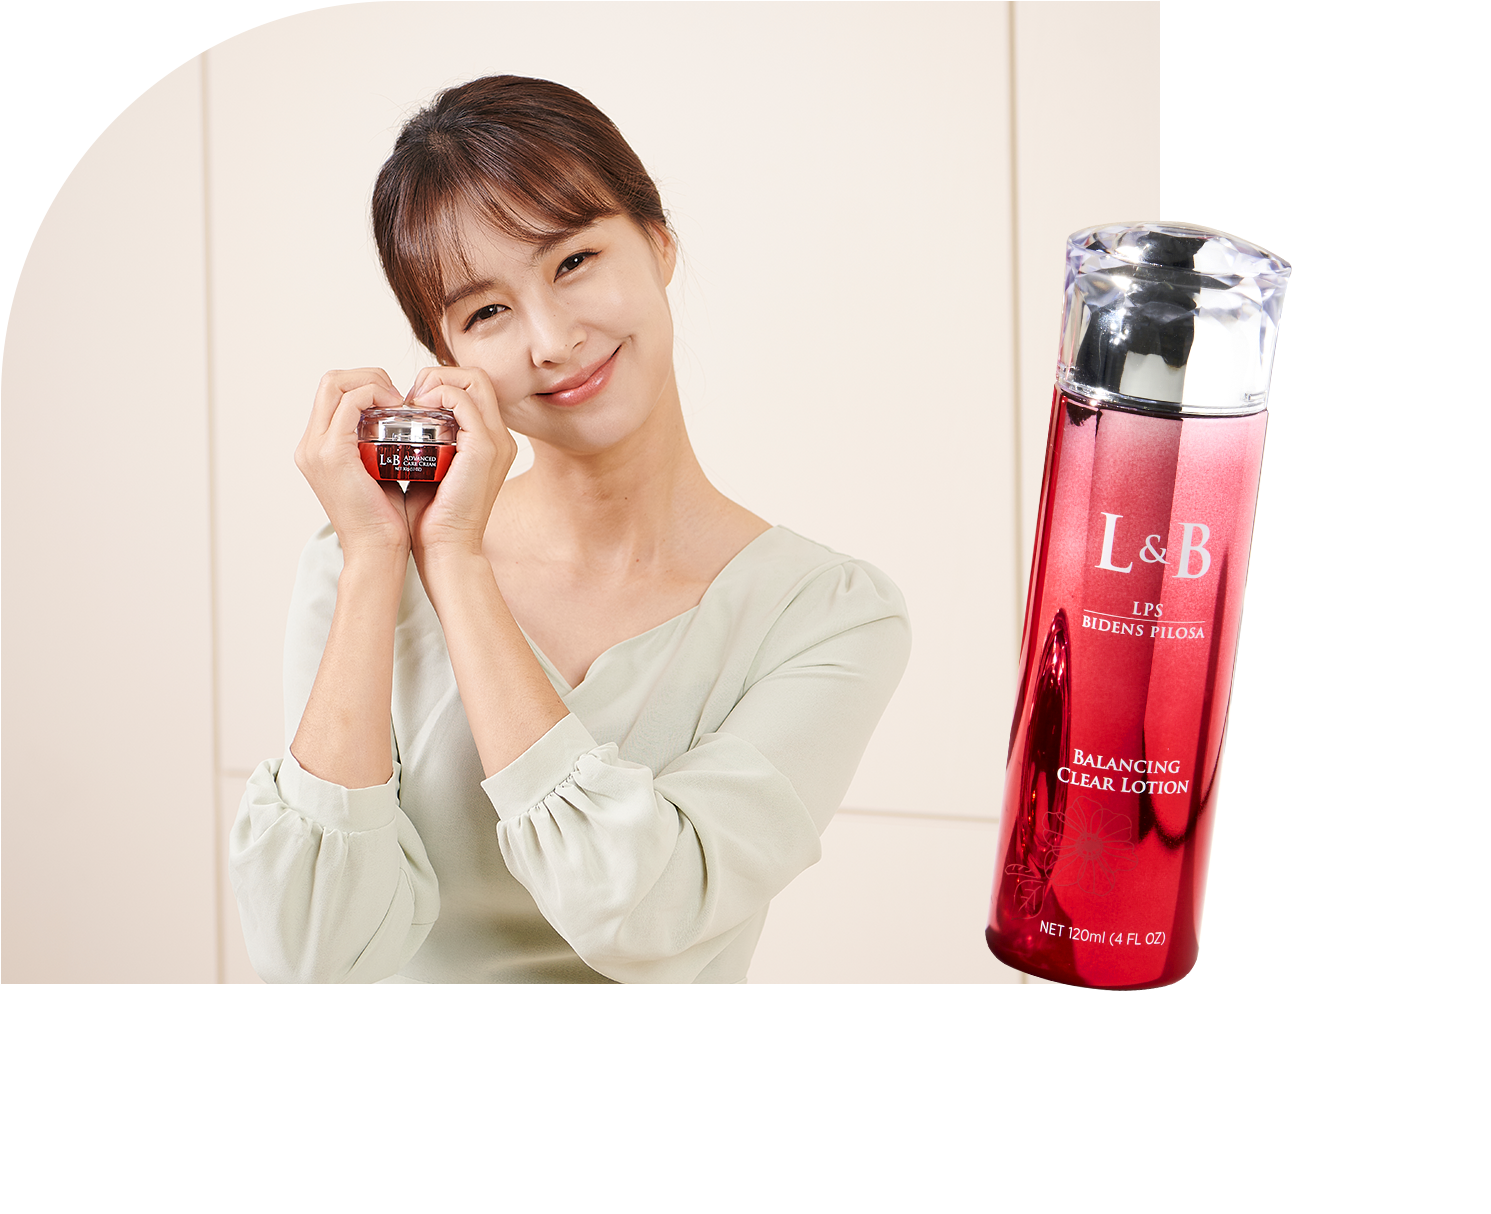 UMEKEN L&B Cosmetics is a combination of “L” in LPS and “B” in Bidens Pilosa to form a new premium cosmetic line that helps with skin immunity.